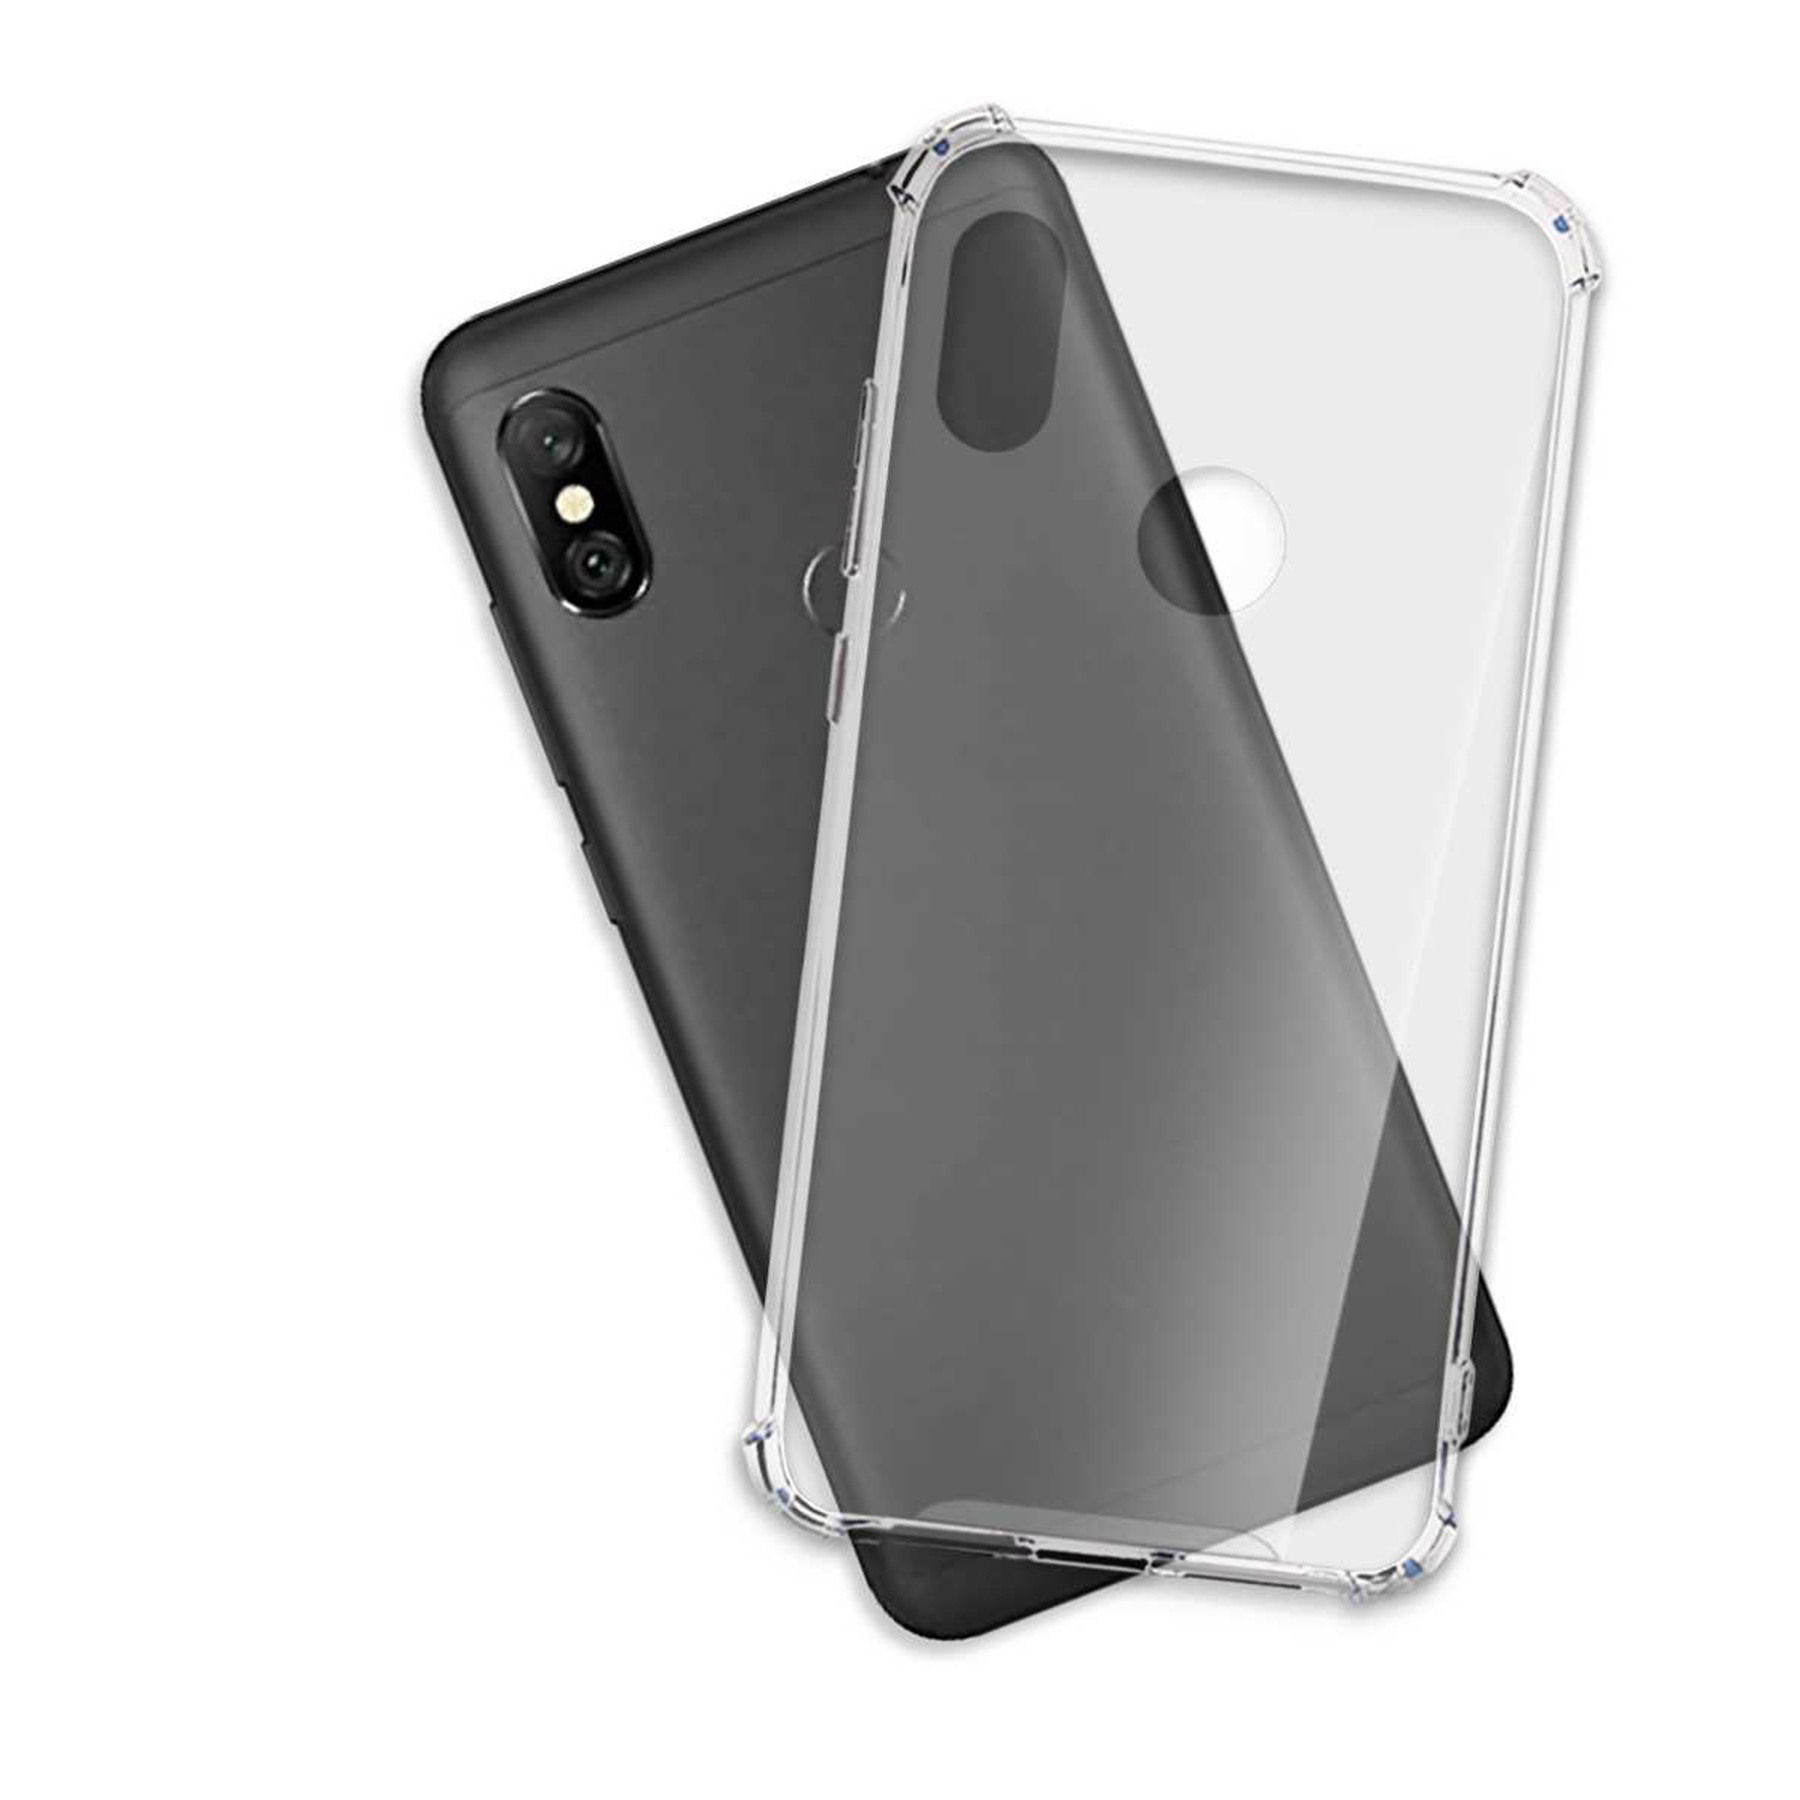 MTB MORE ENERGY Clear Backcover, Armor Case, Xiaomi, Note 6 Pro, Transparent Redmi